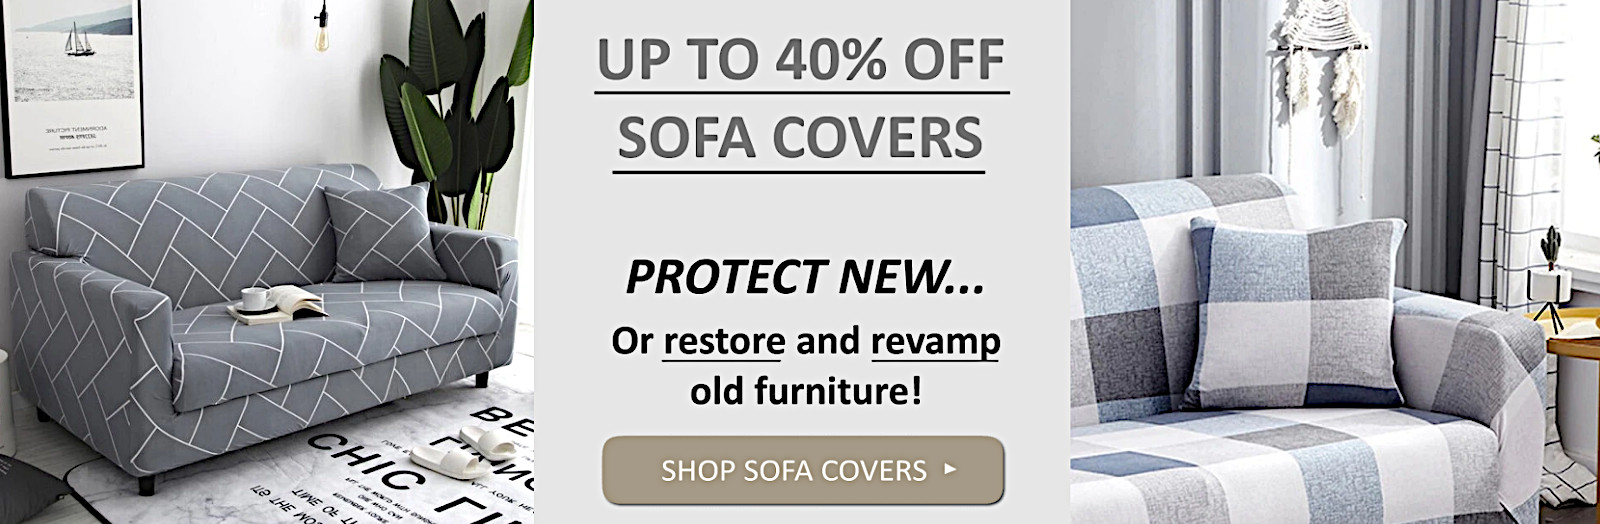 Deal sofa covers